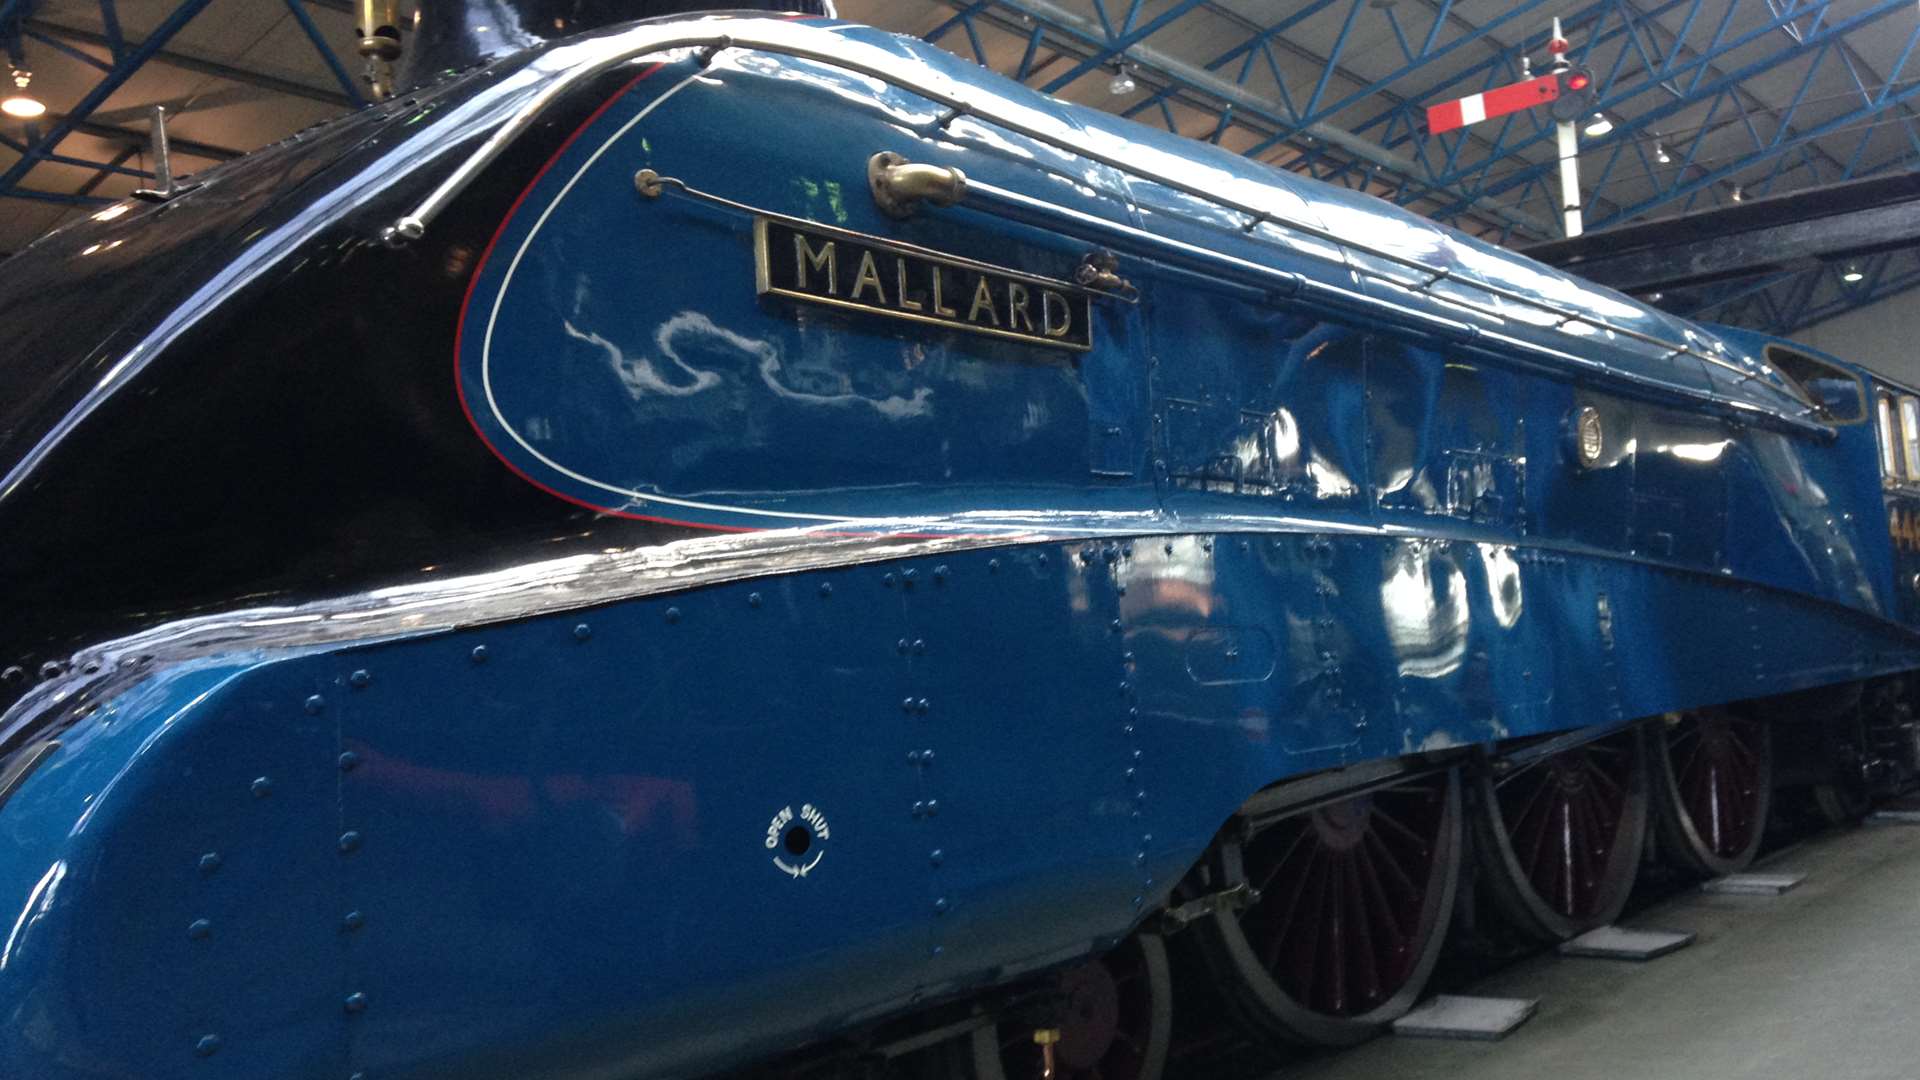 The famous Mallard at the National Railways Museum.